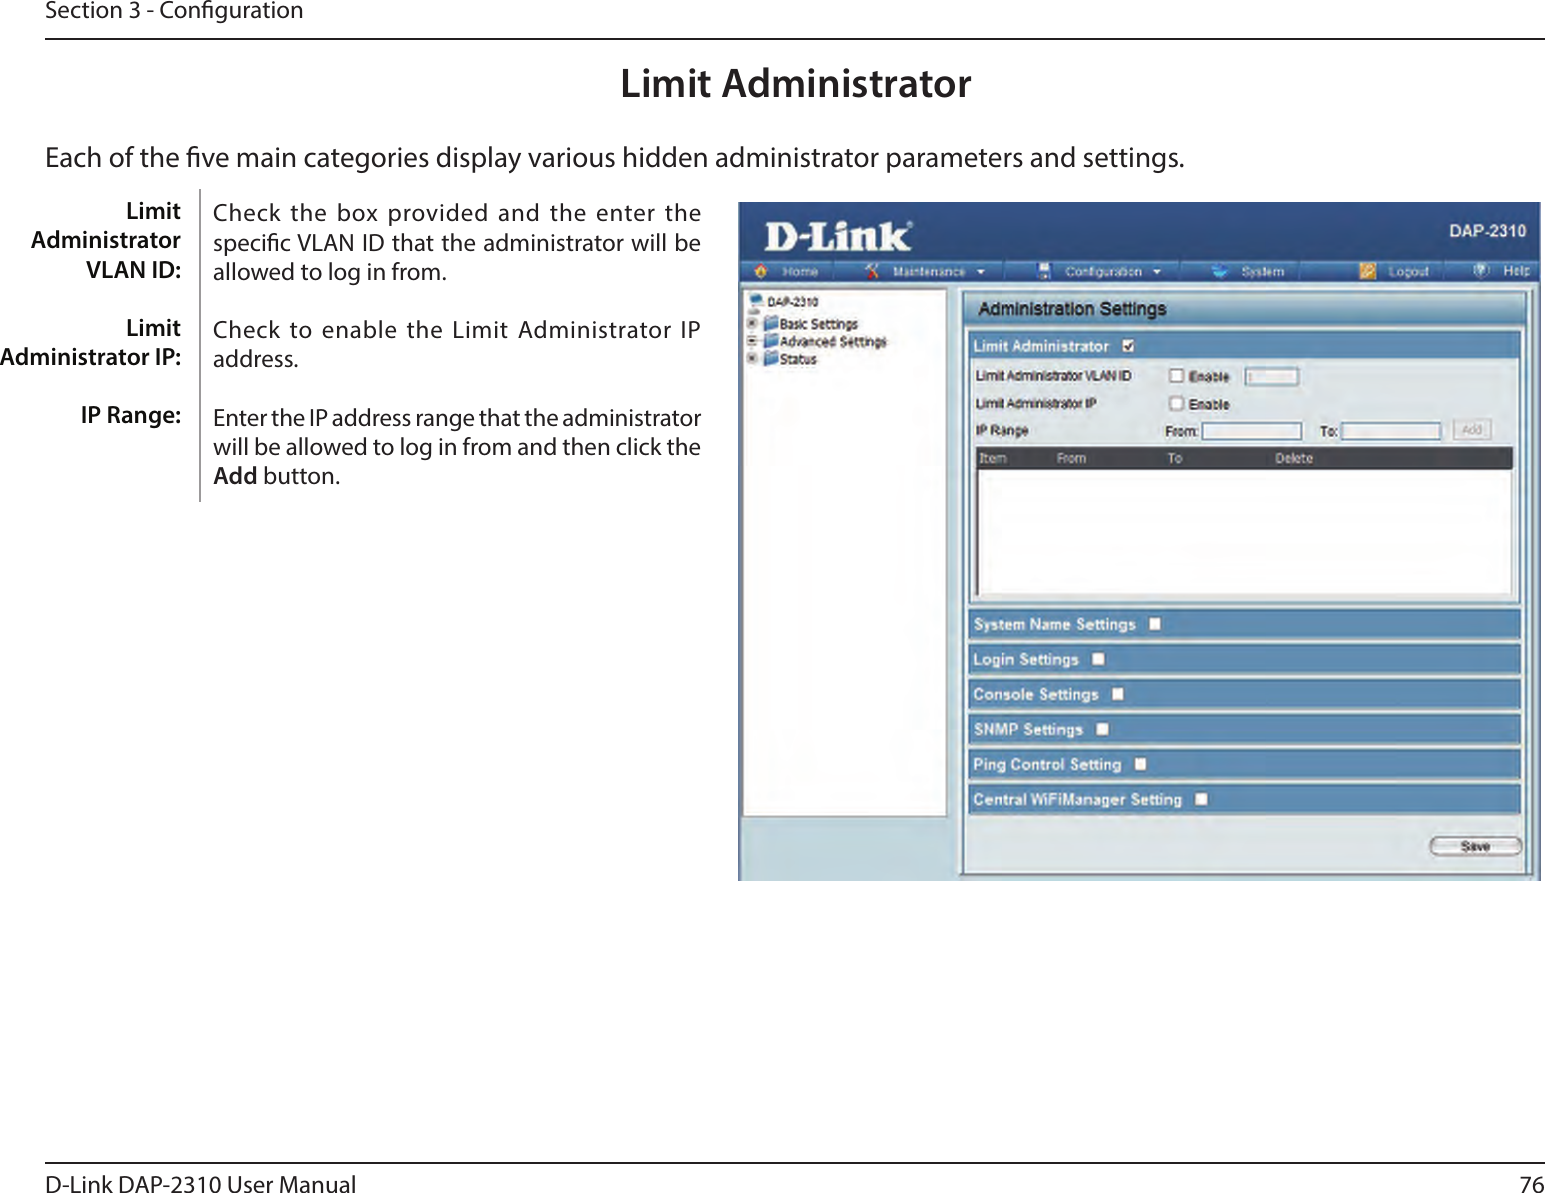 76D-Link DAP-2310 User ManualSection 3 - CongurationLimit AdministratorEach of the ve main categories display various hidden administrator parameters and settings.Check the box provided and the  enter the specic VLAN ID that the administrator will be allowed to log in from.Check to enable the Limit  Administrator IP address.Enter the IP address range that the administrator will be allowed to log in from and then click the Add button.Limit Administrator VLAN ID:Limit Administrator IP:IP Range: